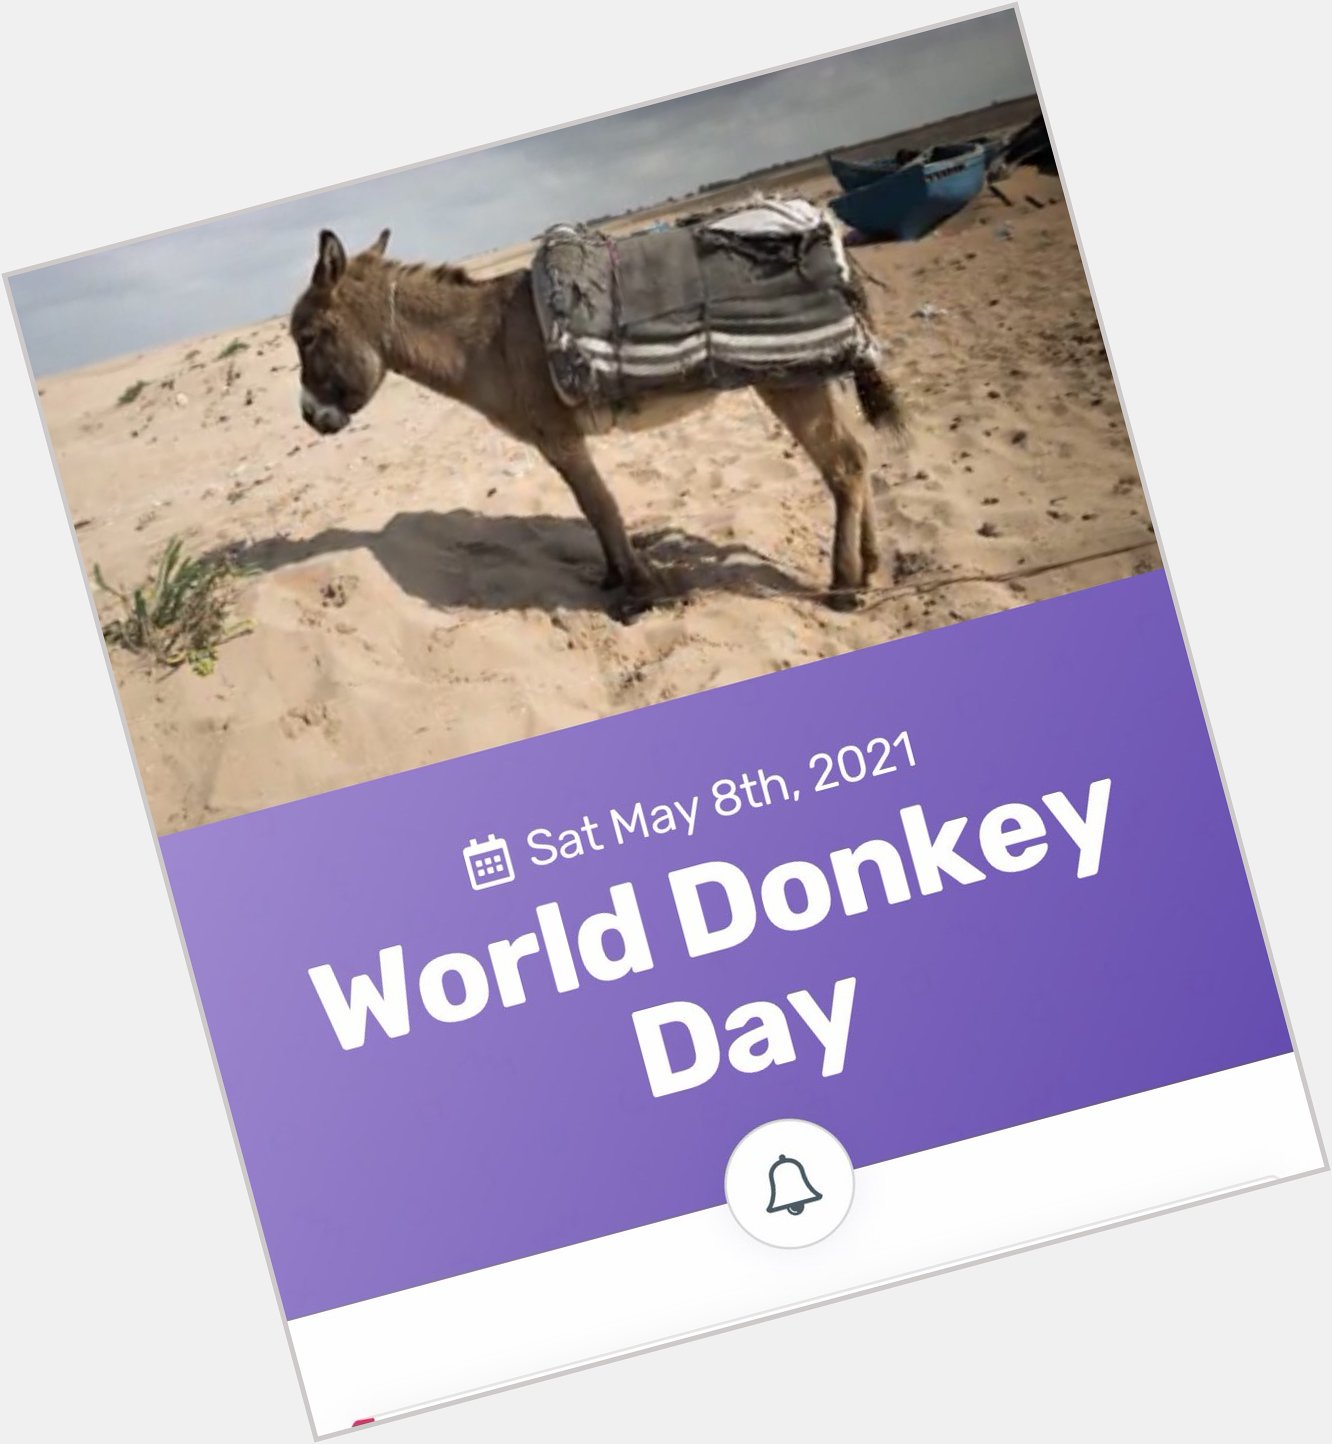    And it s world donkey day... so happy birthday to the wee donkey as well 